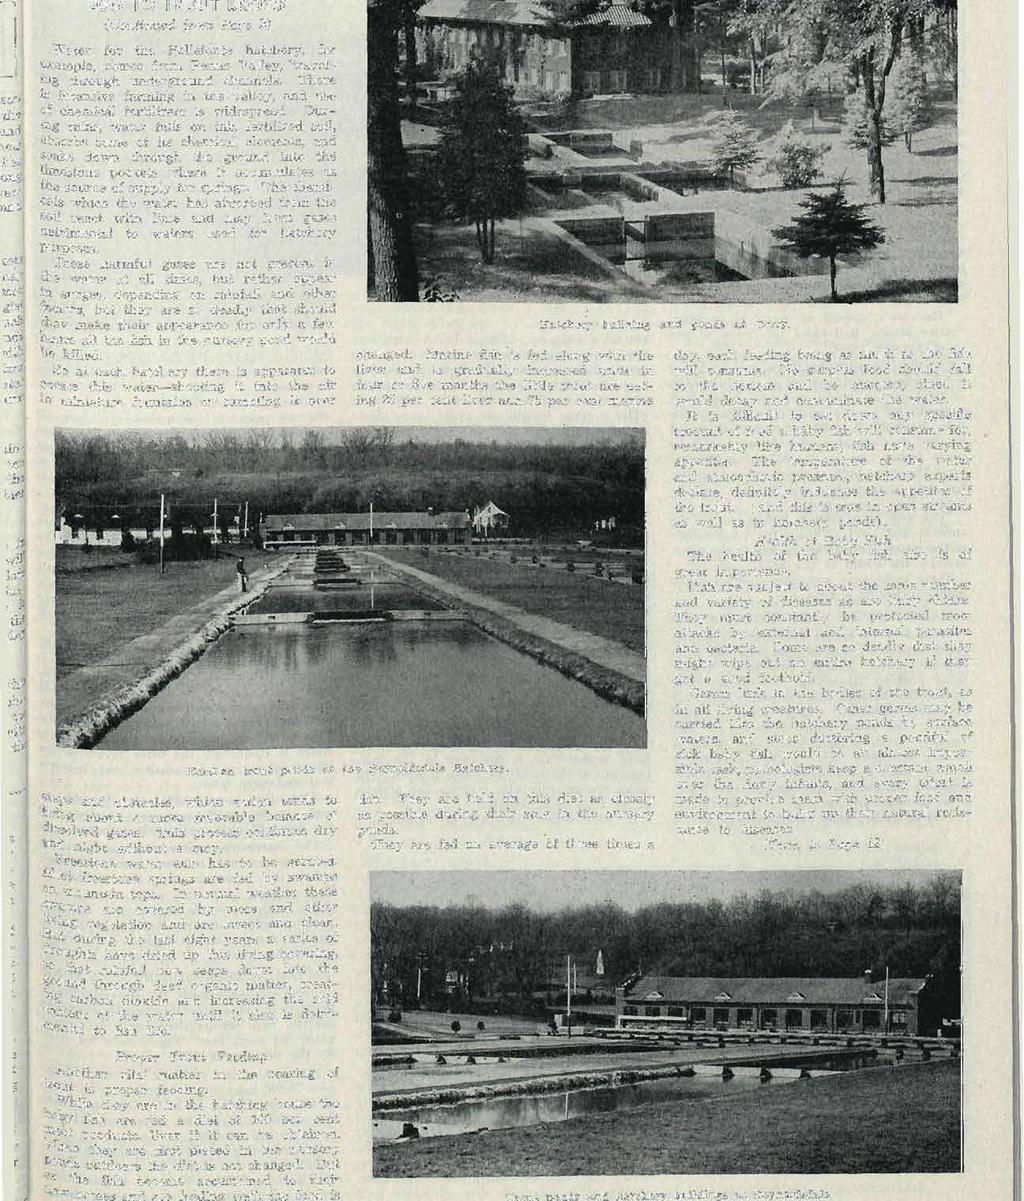 CH 1947 PENNSYLVANIA ANGLER 11 EGG TO TROUT BROOK (Continued from Page 2) "Water for the Bellefonte hatchery, for example, comes from Penns Valley, "traveling through underground channels.